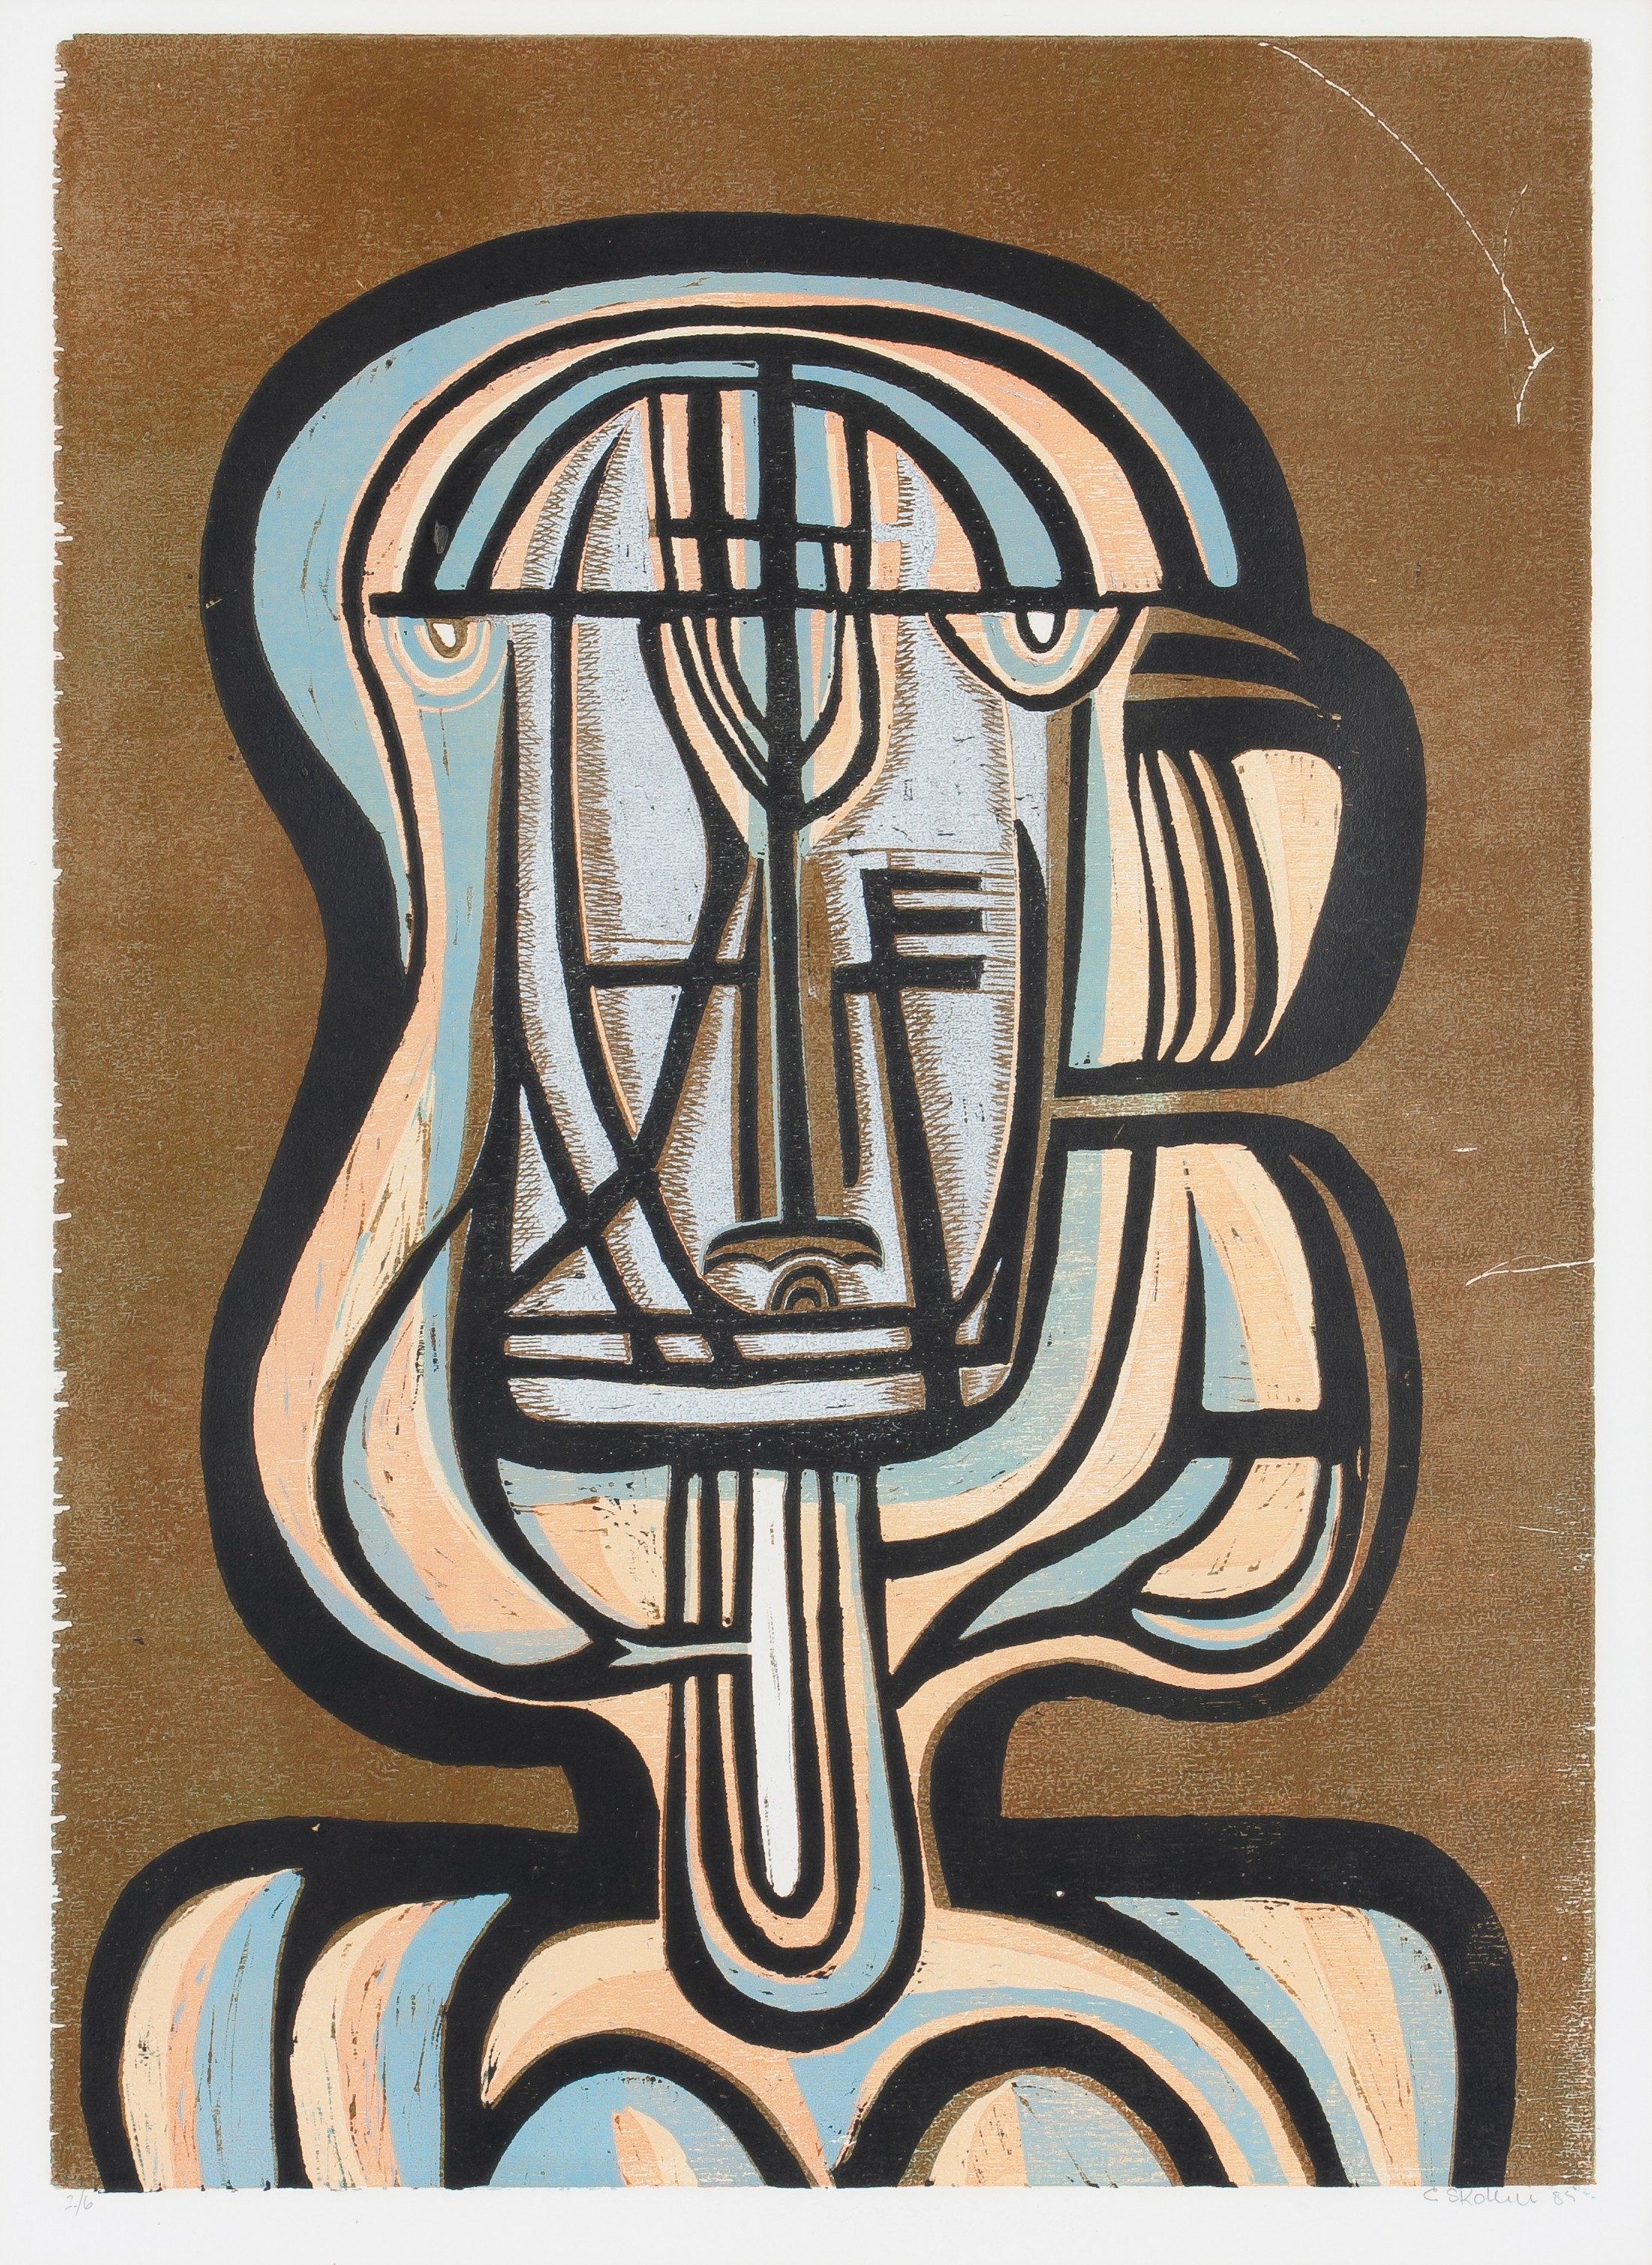 ABSTRACT PORTRAIT by Cecil Skotnes, 1985